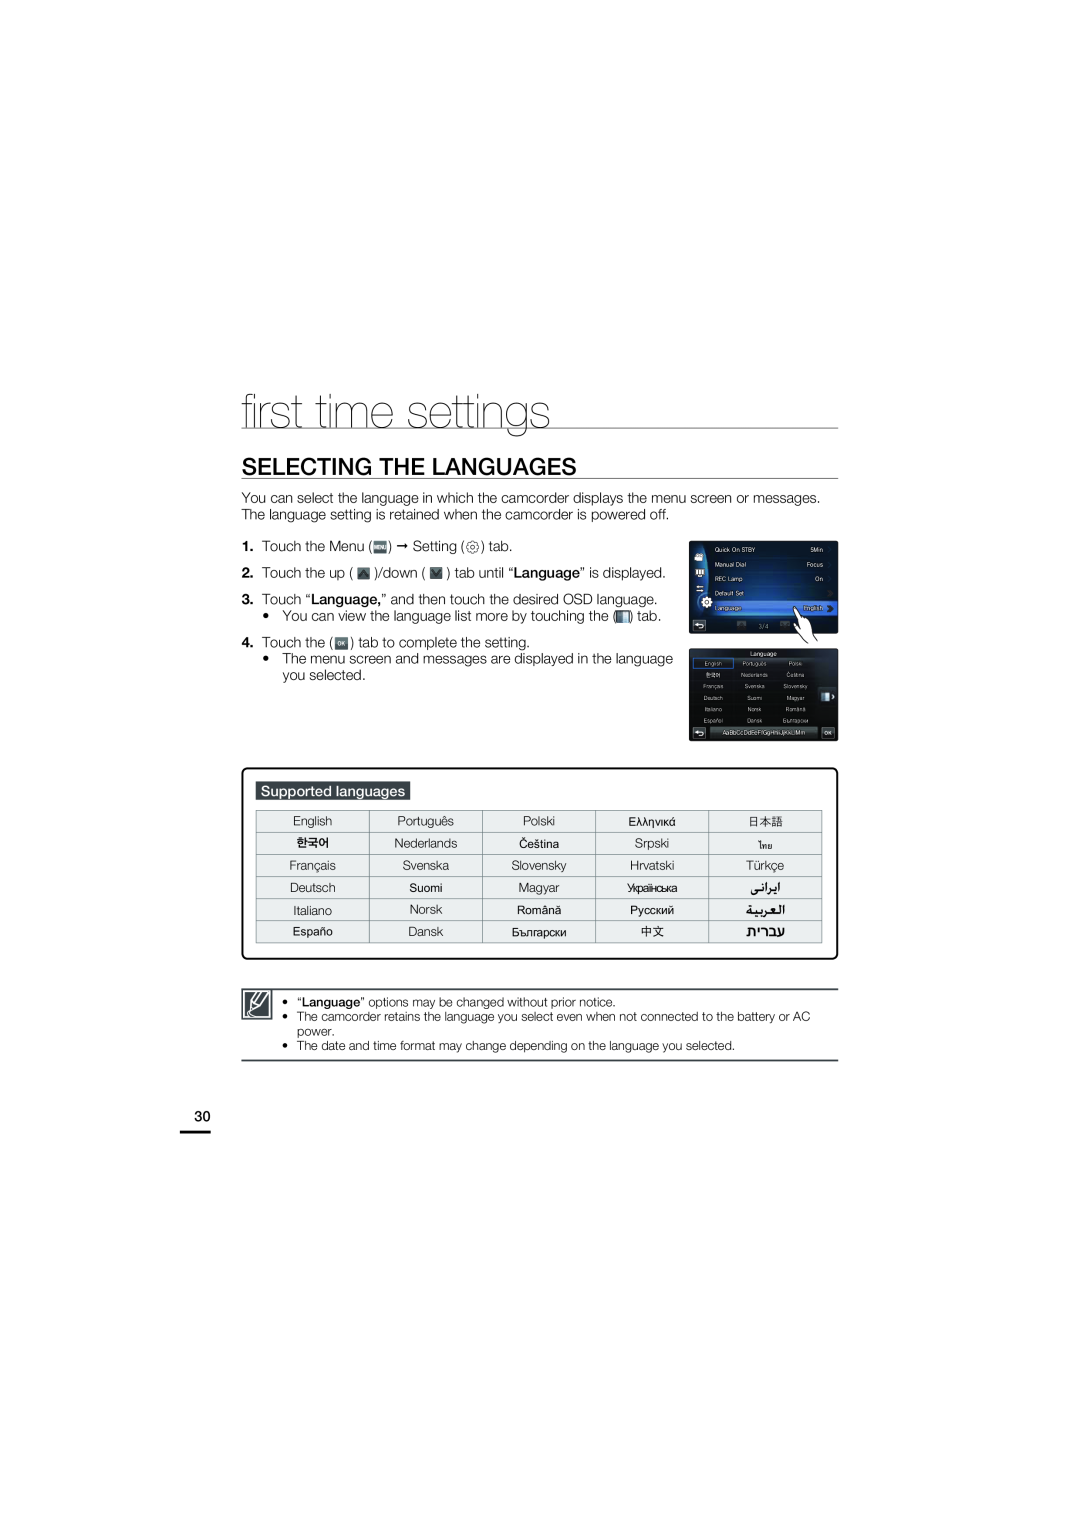 Samsung HMX-S15BN/XAA, HMX-S10BN/XAA manual Selecting The Languages, Supported languages, ﬁrst time settings 